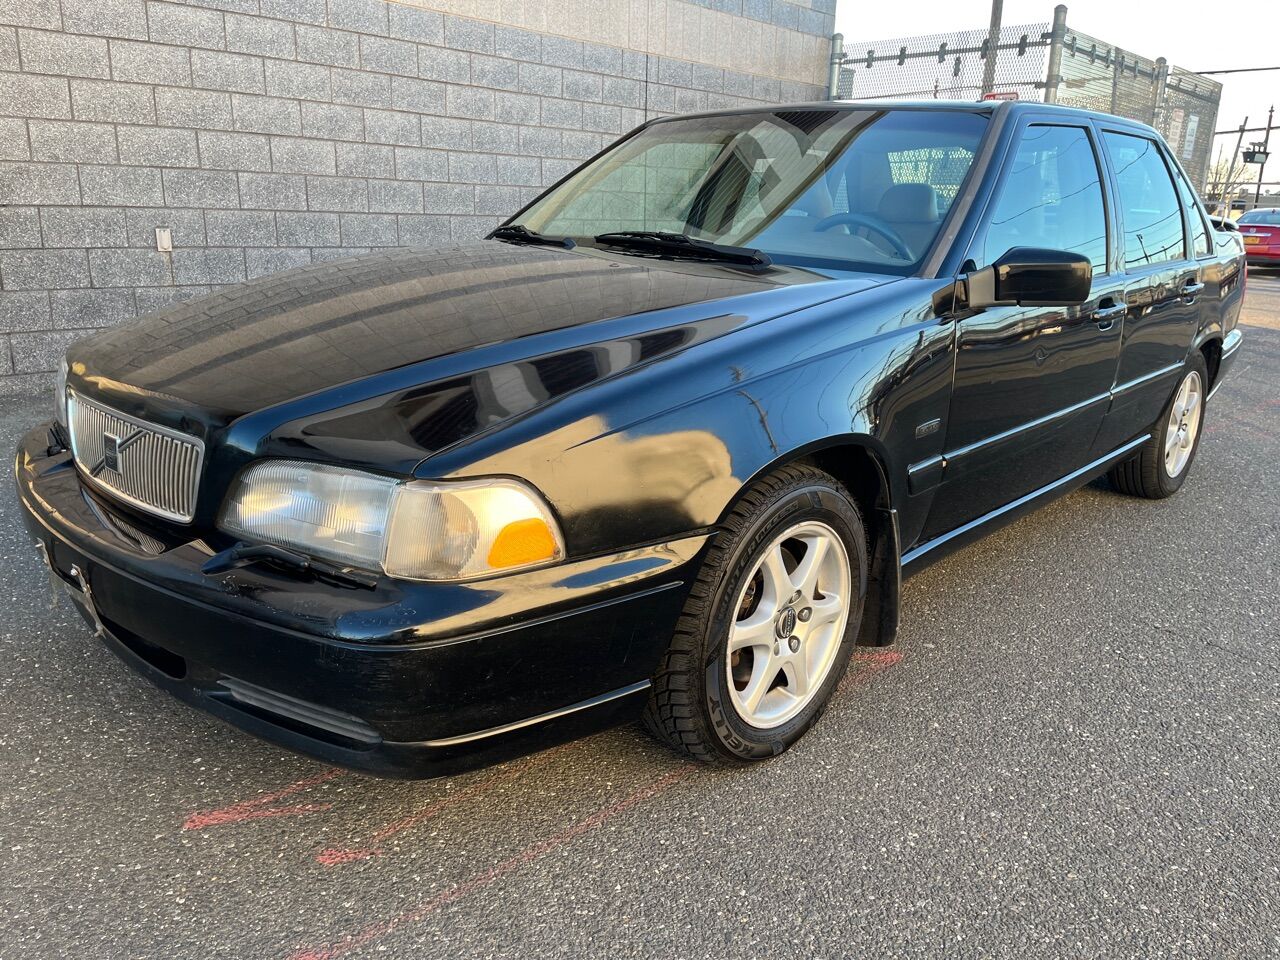 Volvo S70 For Sale - Carsforsale.com®